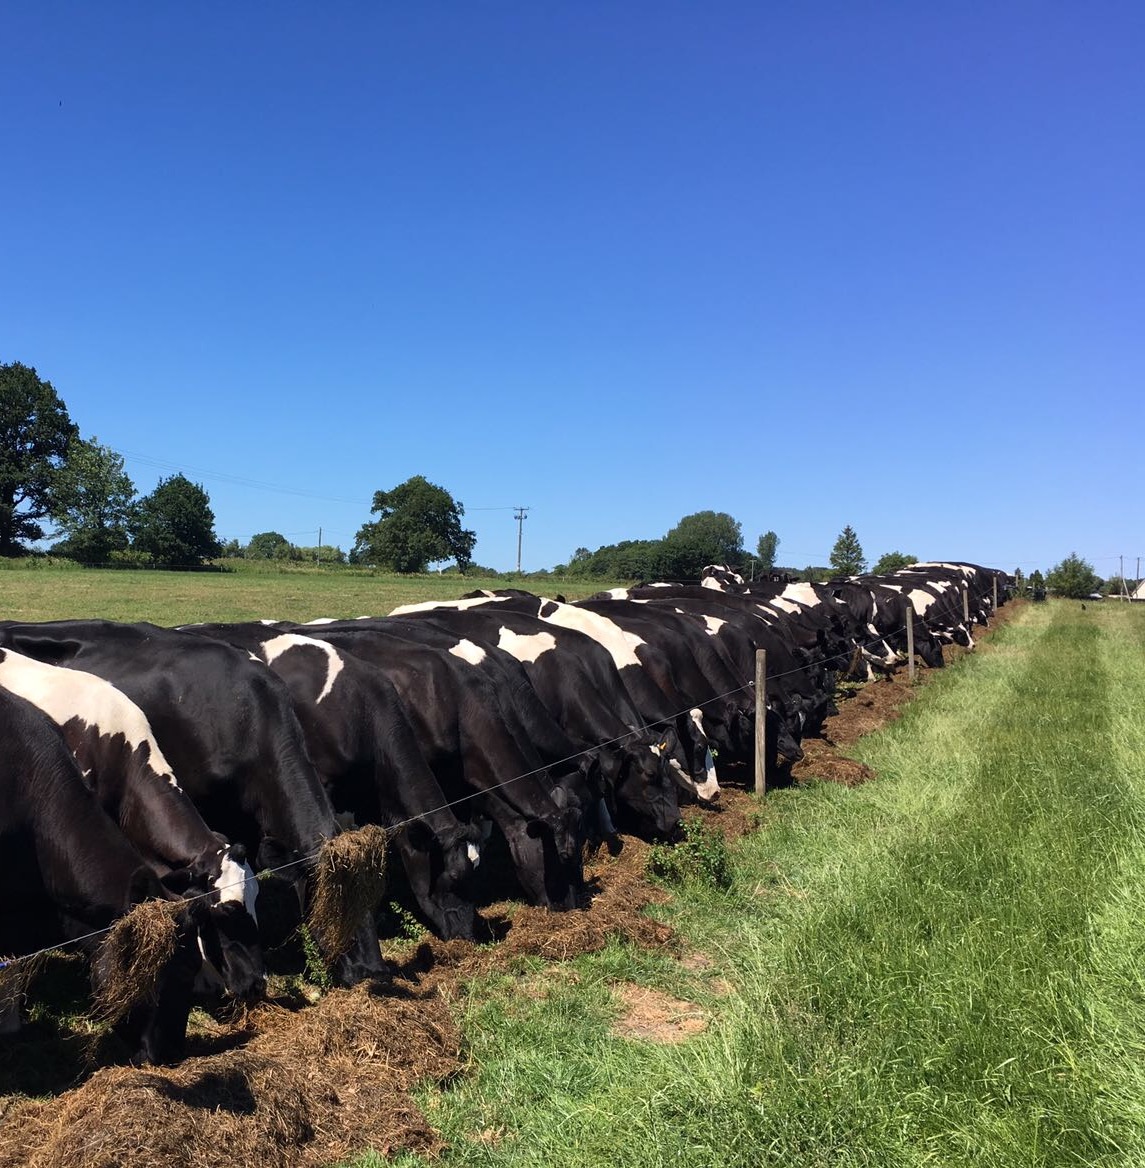 a large group of cows in a field